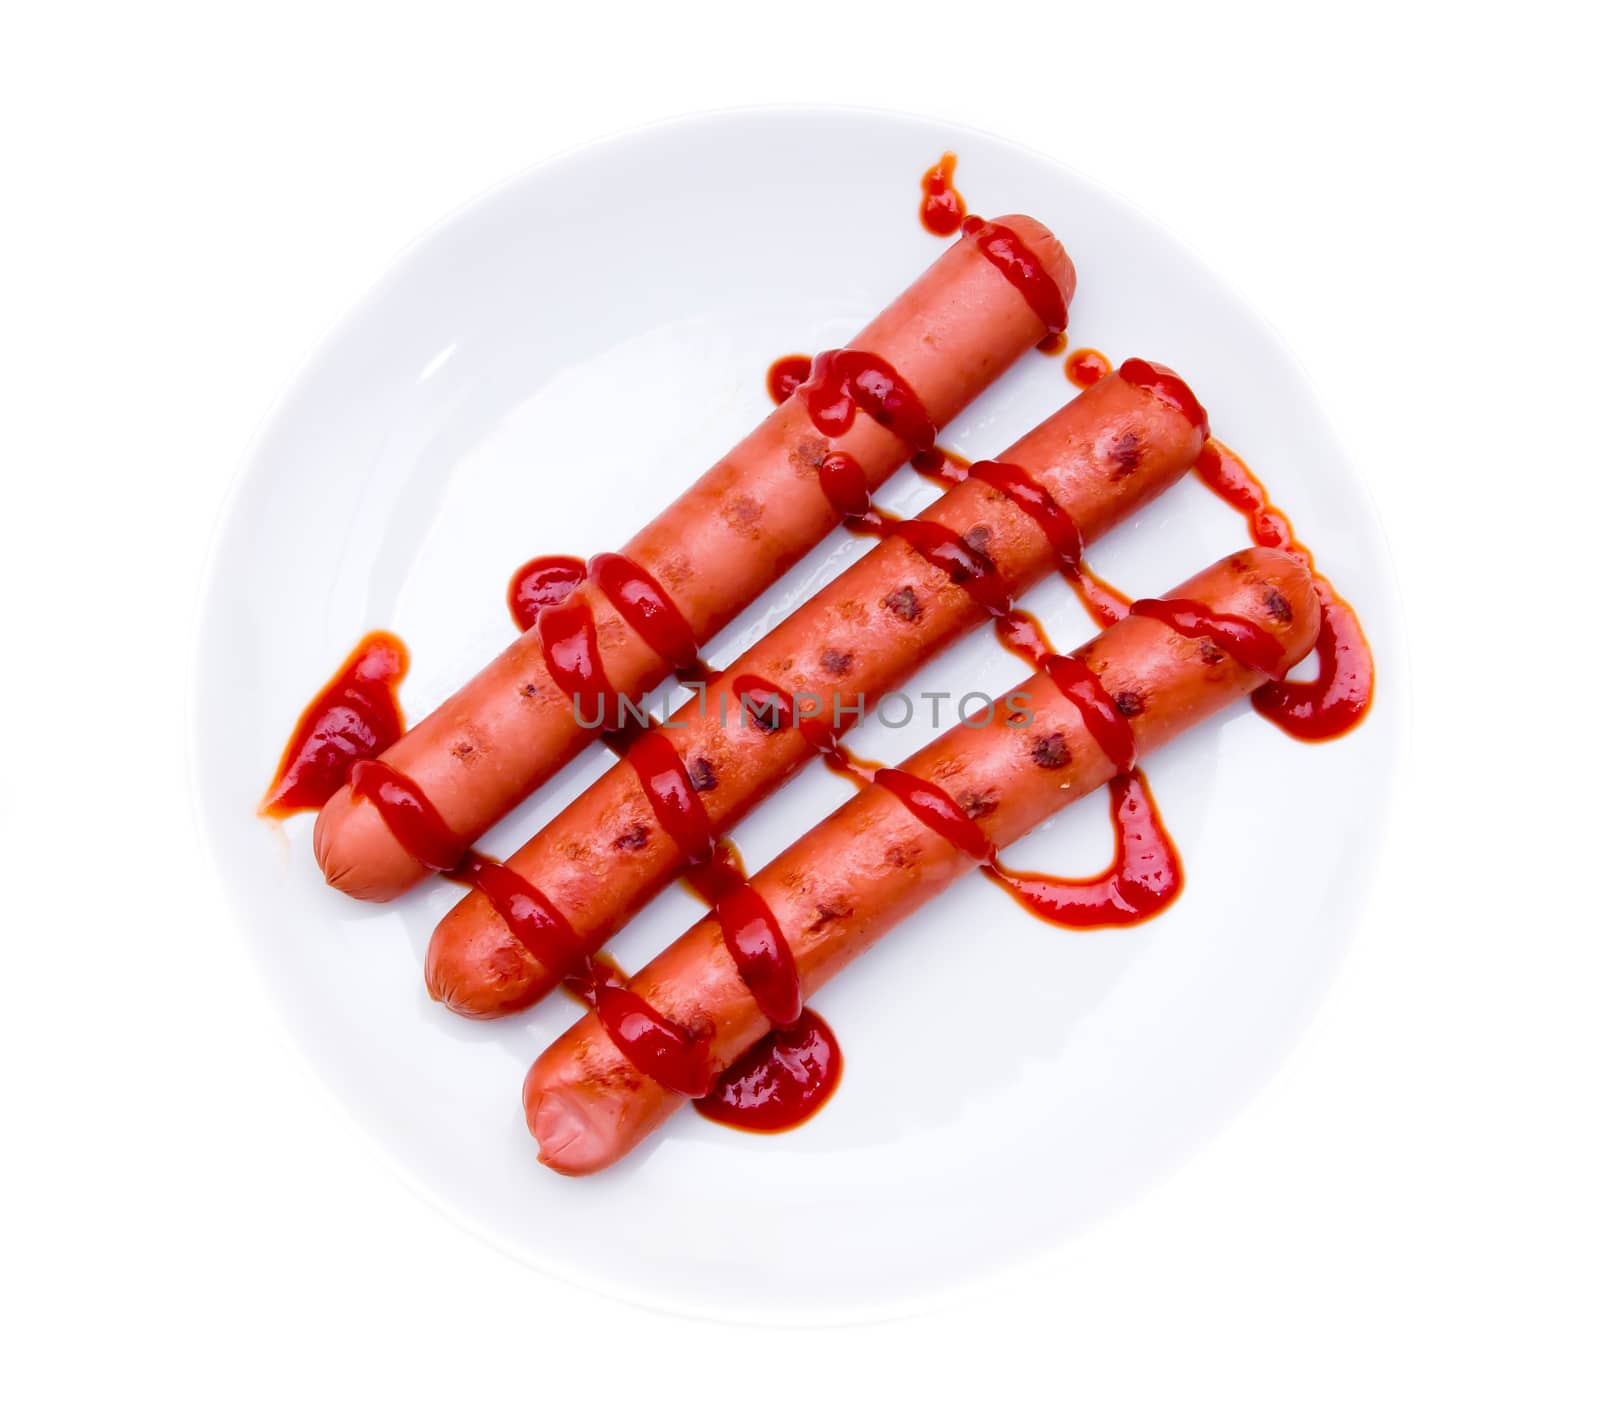 Sausages with tomato sauce from above by spafra